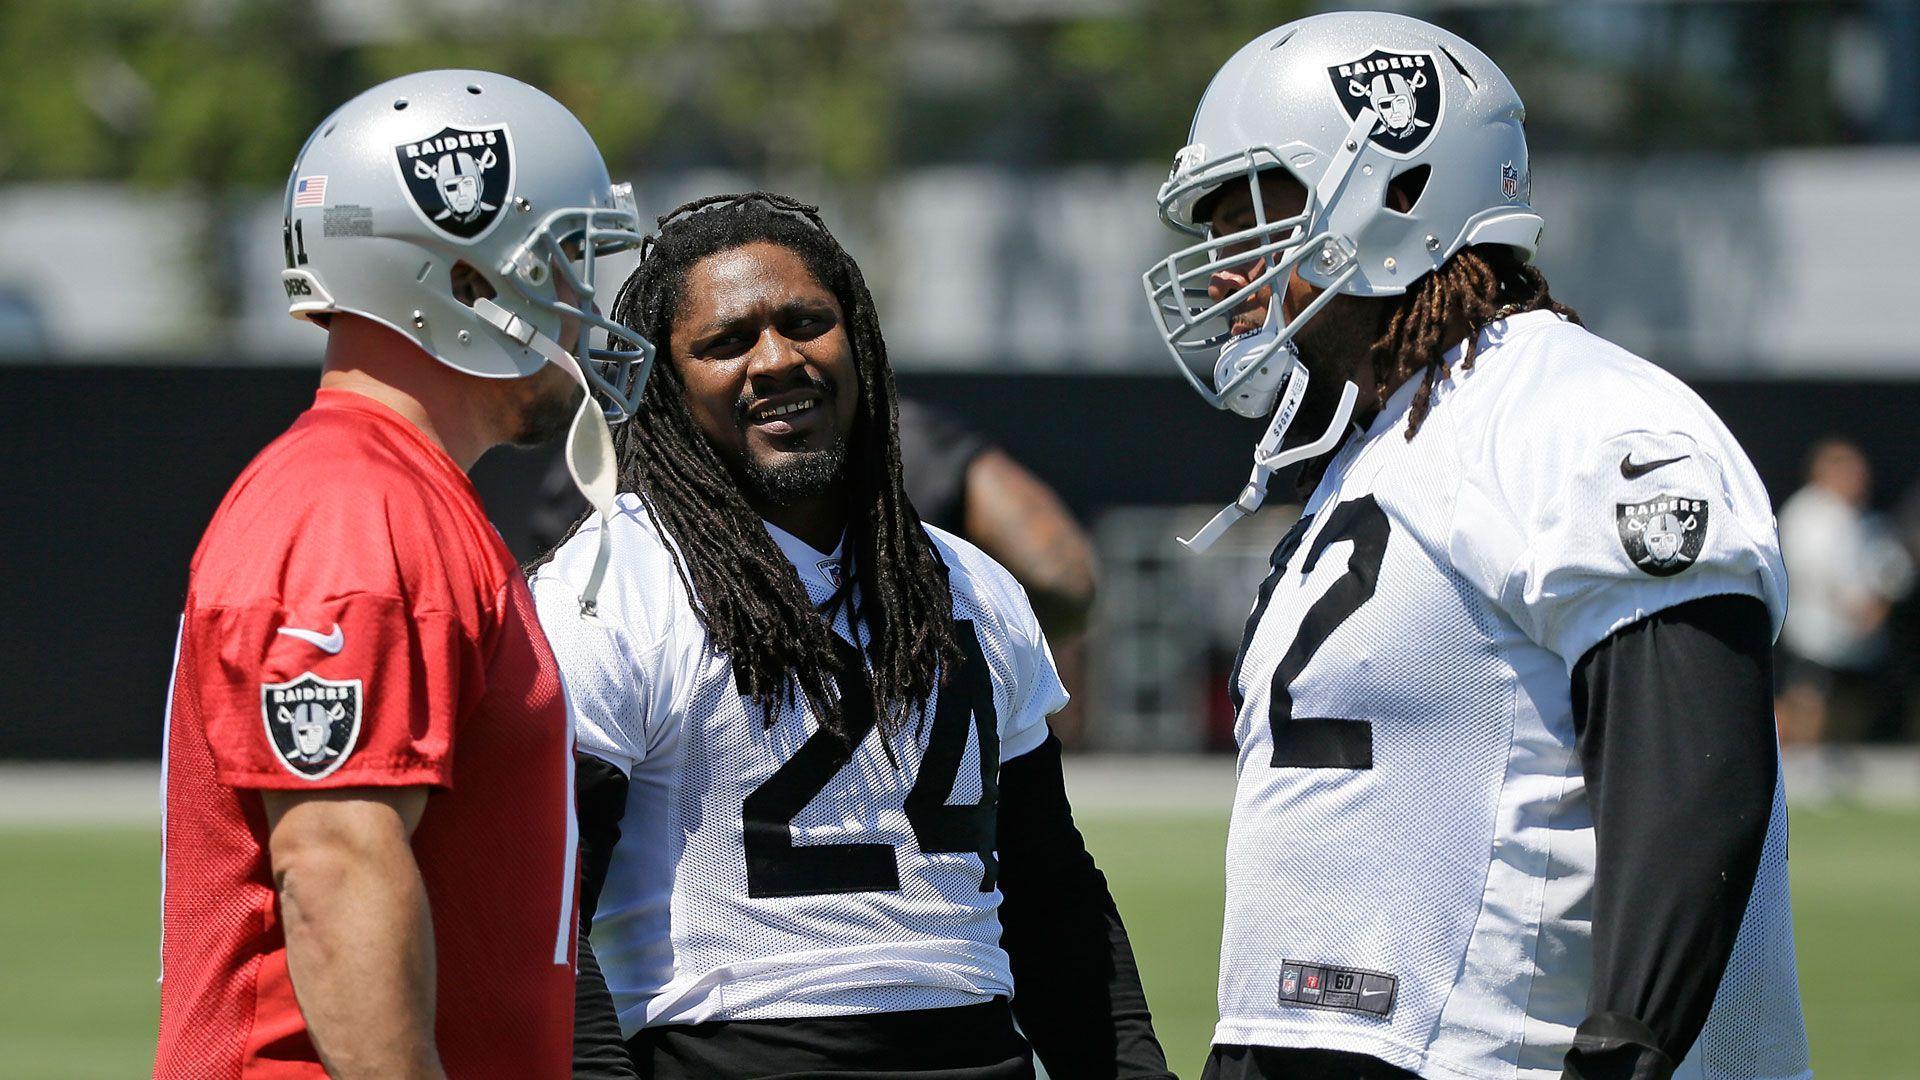 Lynch 'soaking up the system, ' easing into Raiders OTA practices